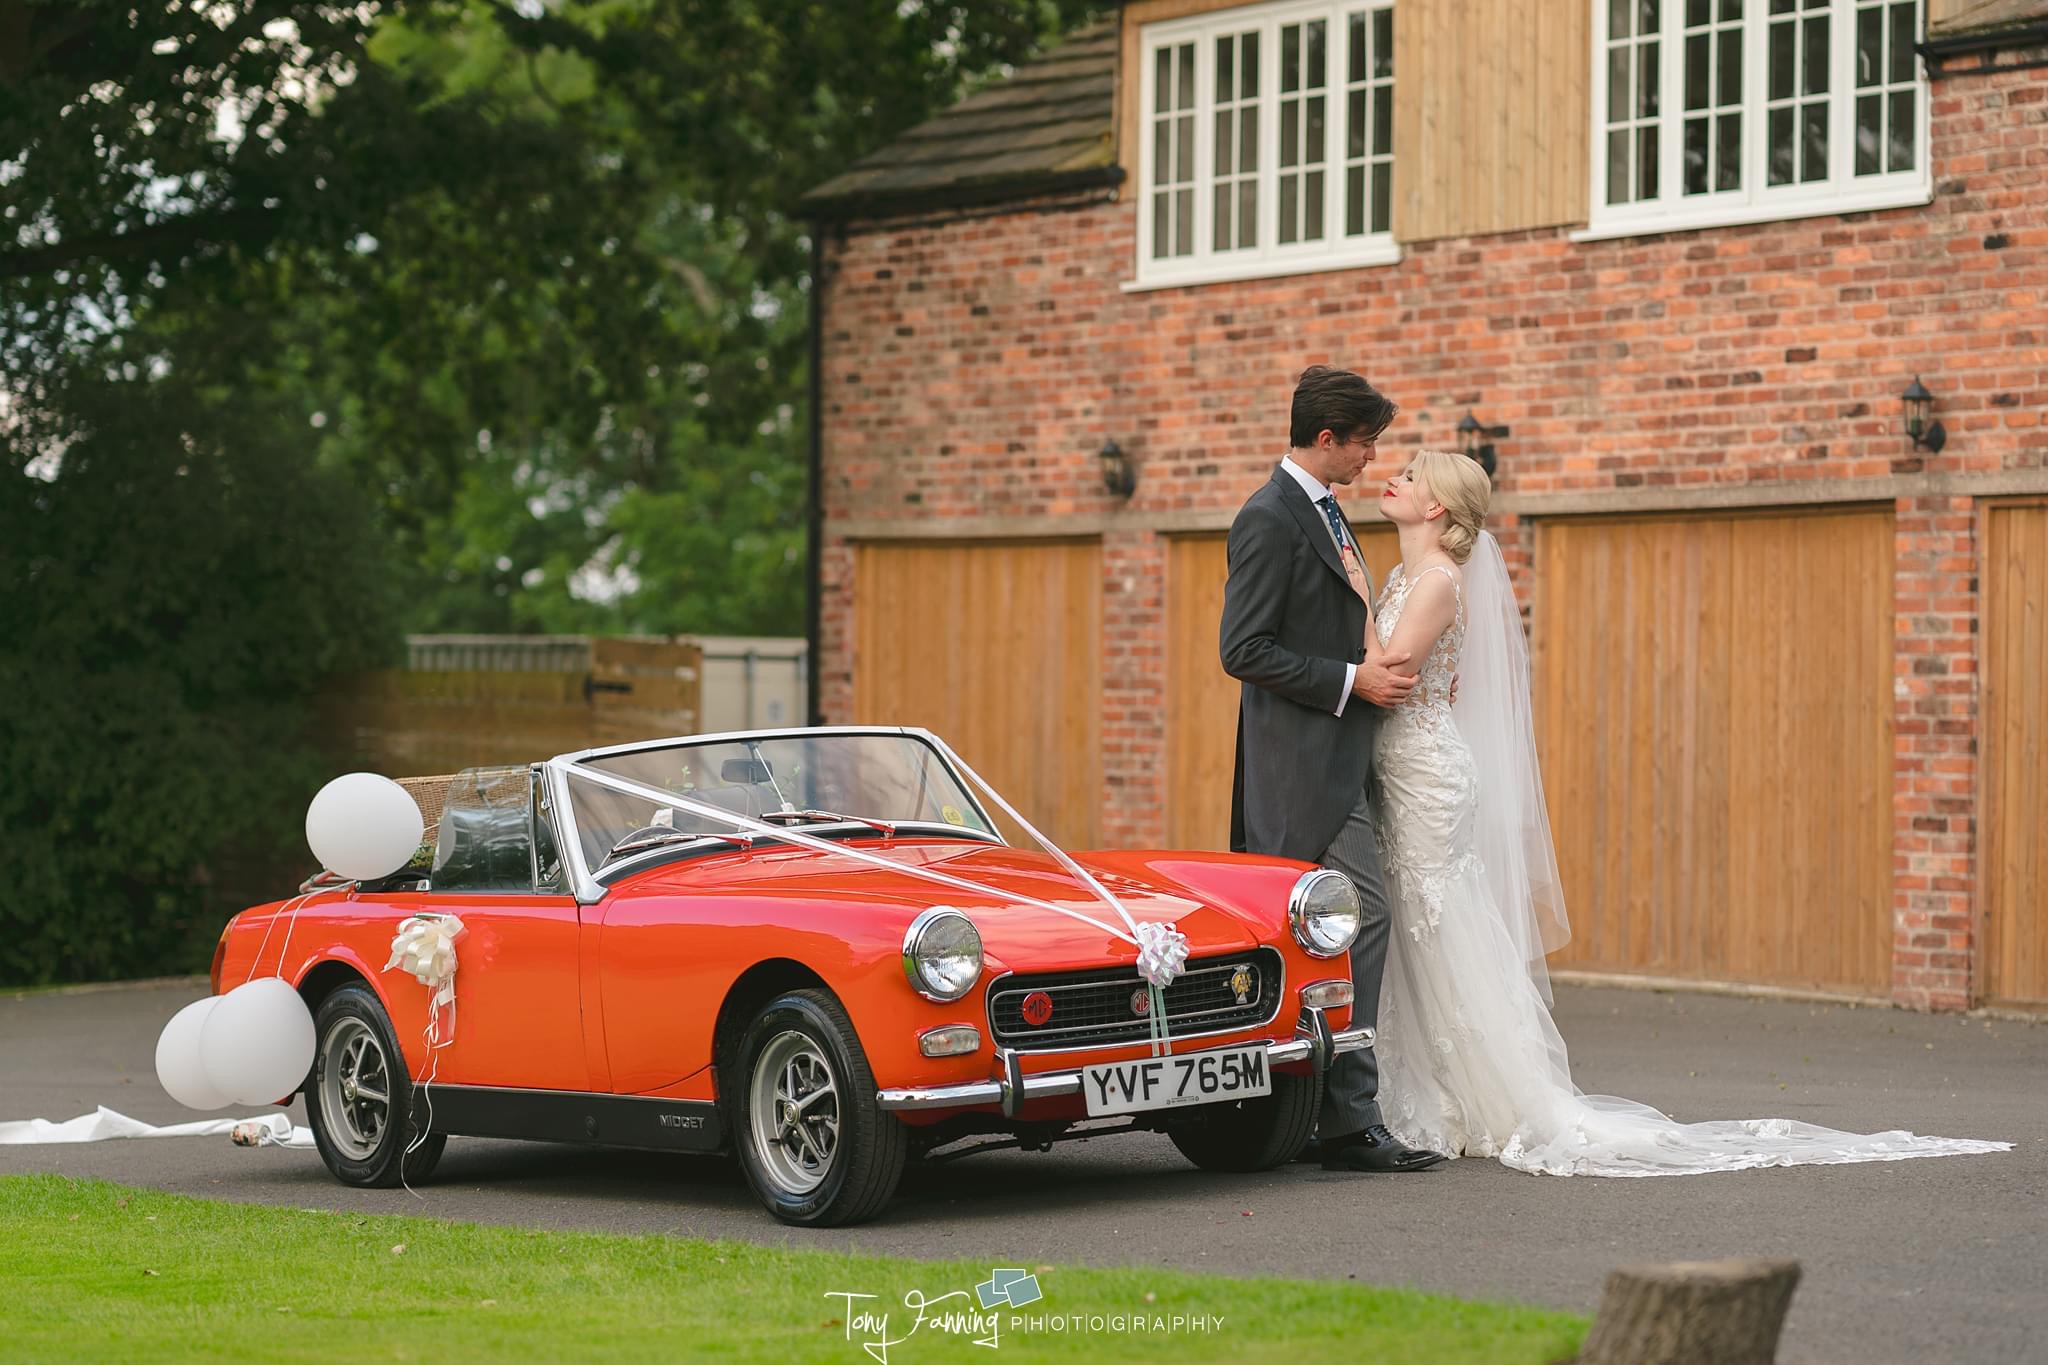 Lydia and Matt travelled from the church to their reception at Hilltop Country House in a red sportscar